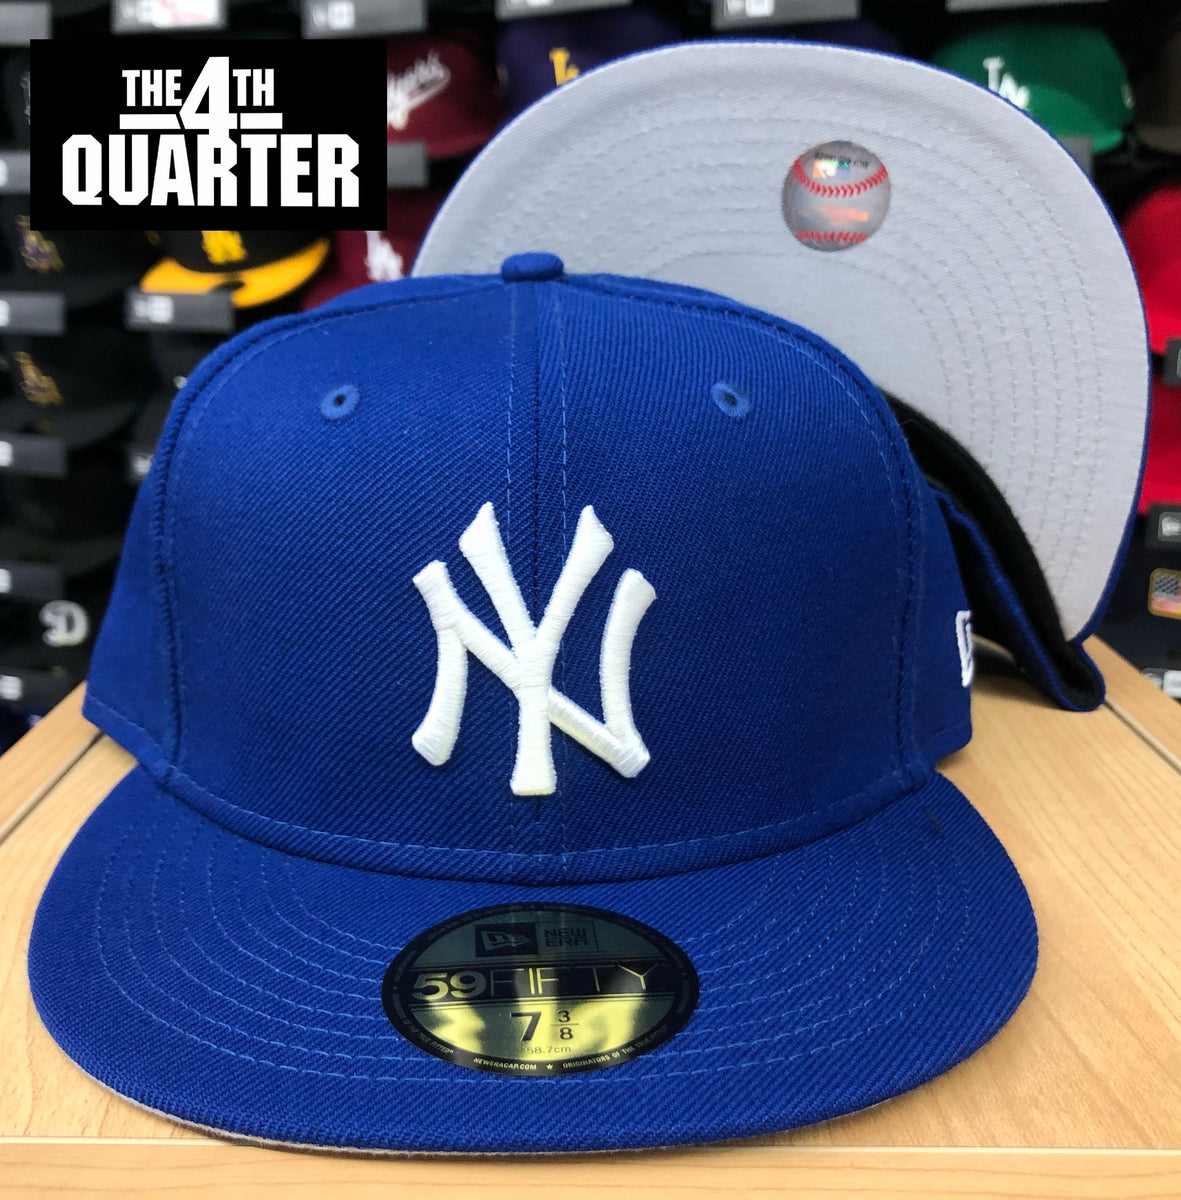 Era THE Blue 4TH GREY Fitted Cap | New QUARTER New Royal Yankees Hat 59Fifty York UV